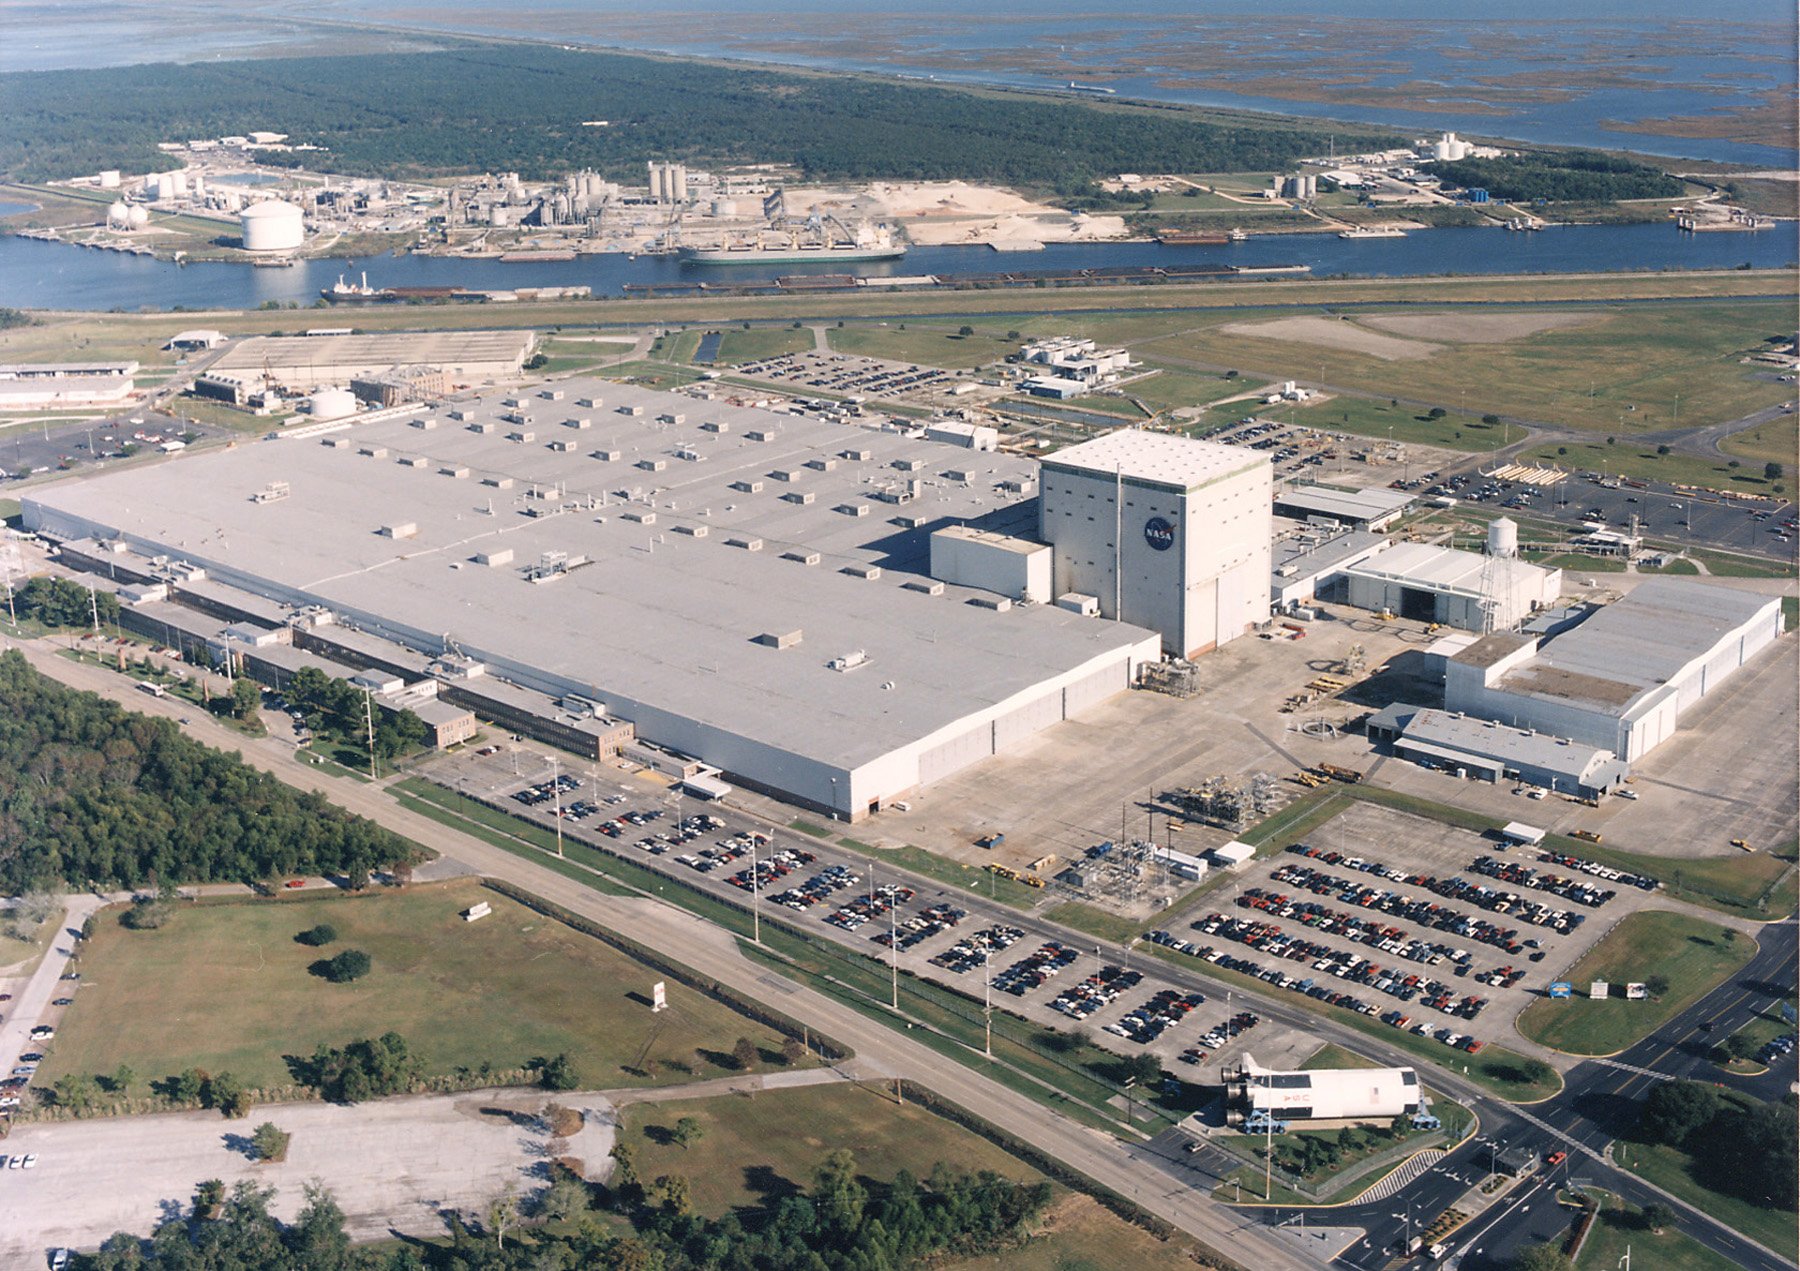 An aerial view of the primary manufacturing facility at NASA's Michoud Assembly Facility in New Orleans.